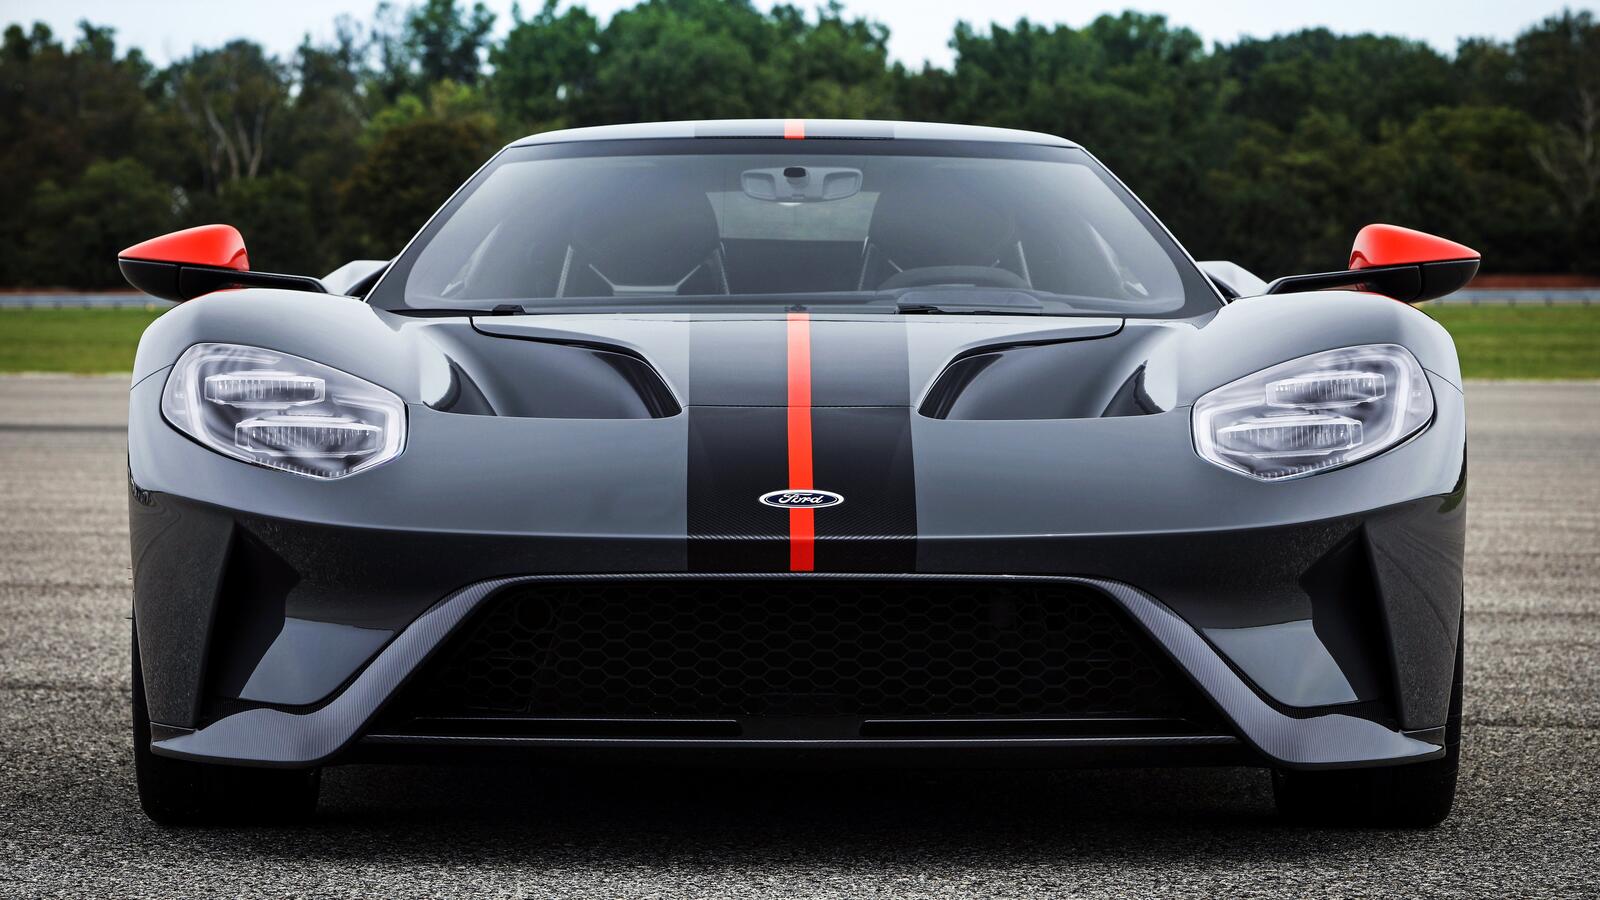 Wallpapers Ford Gt Carbon Series black front view on the desktop